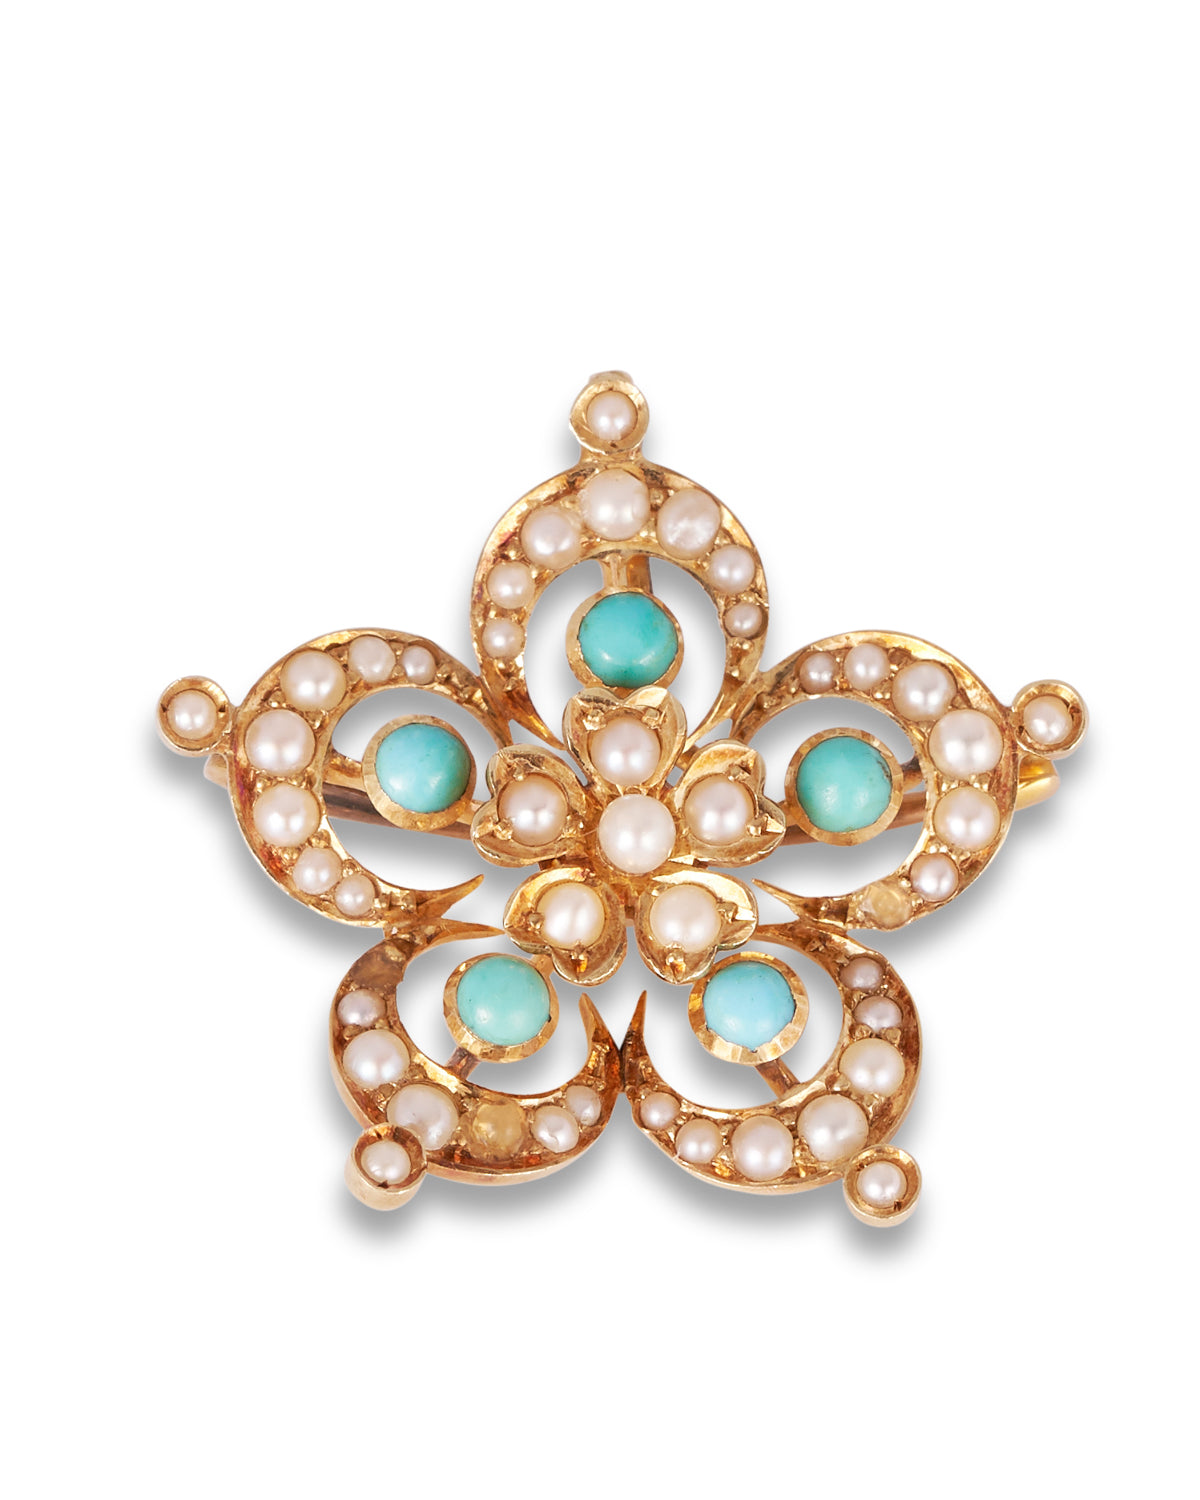 Antique Seed Pearl & Turquoise Flower Brooch